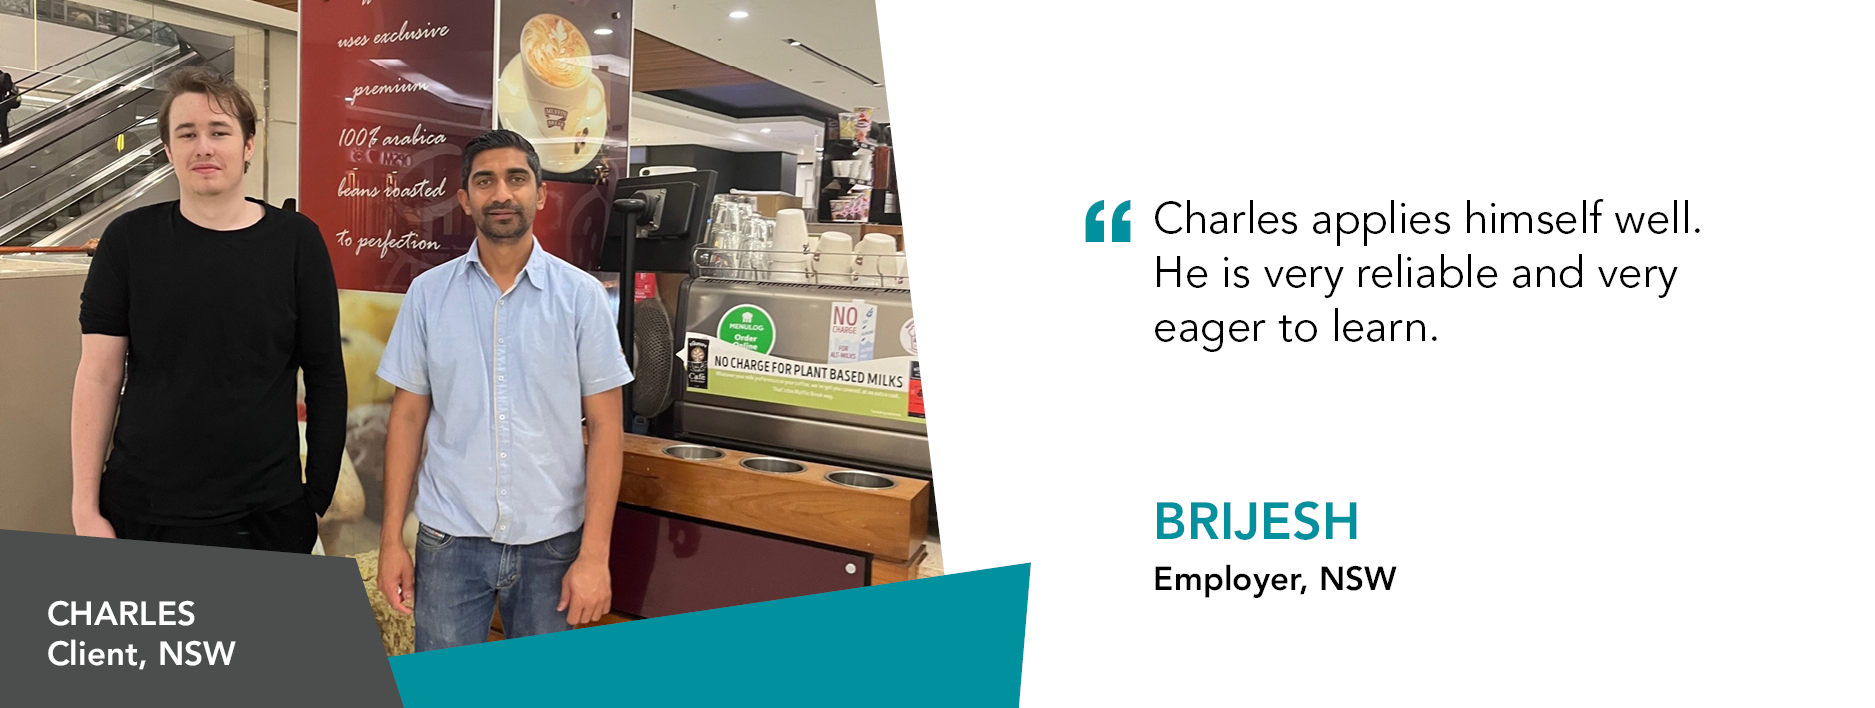 Quote reads "Charles applies himself well. He is very reliable and very eager to learn." said Brijesh, Employer New South Wales